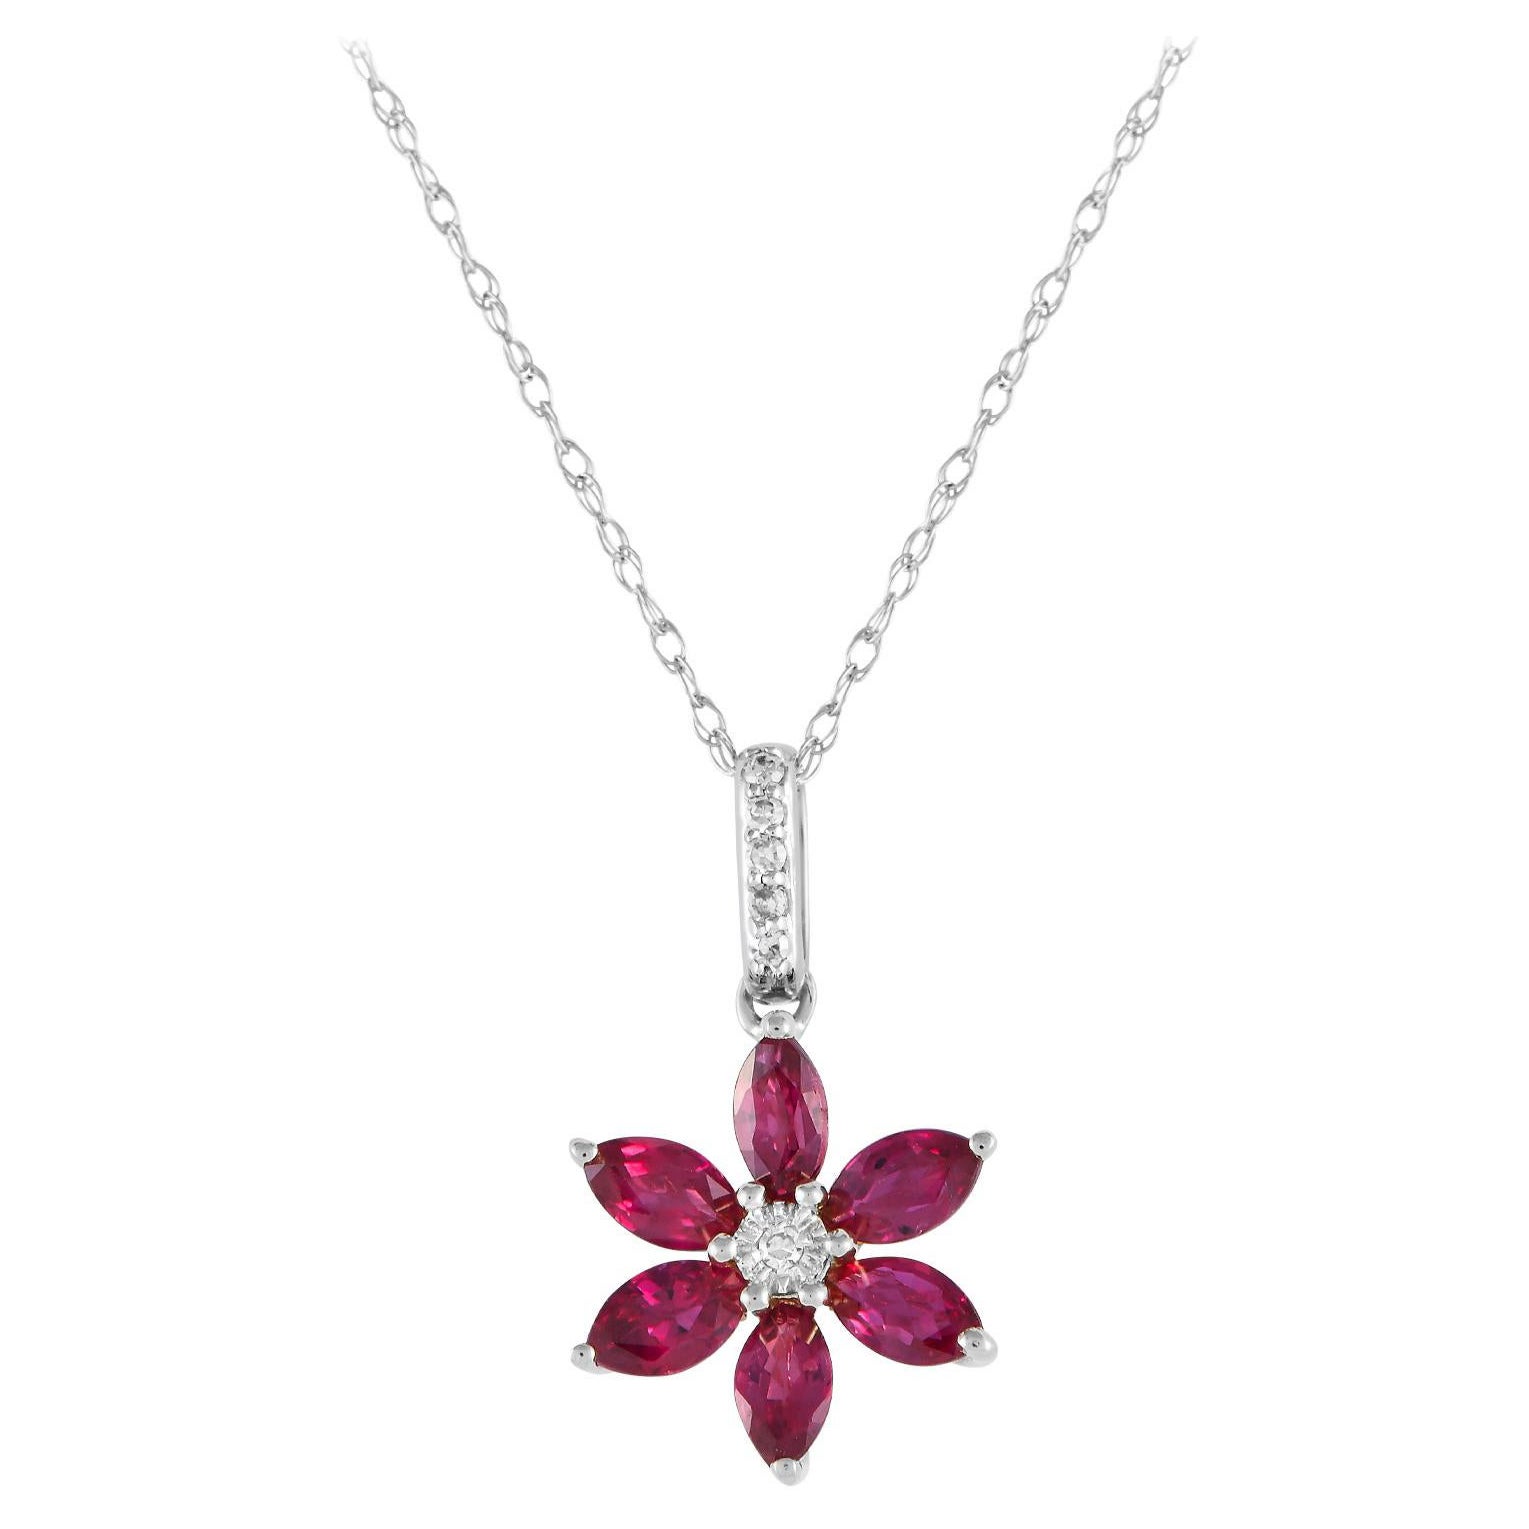 LB Exclusive 14K White Gold 0.01ct Diamond and Ruby Flower Necklace PD4-16241WRU For Sale